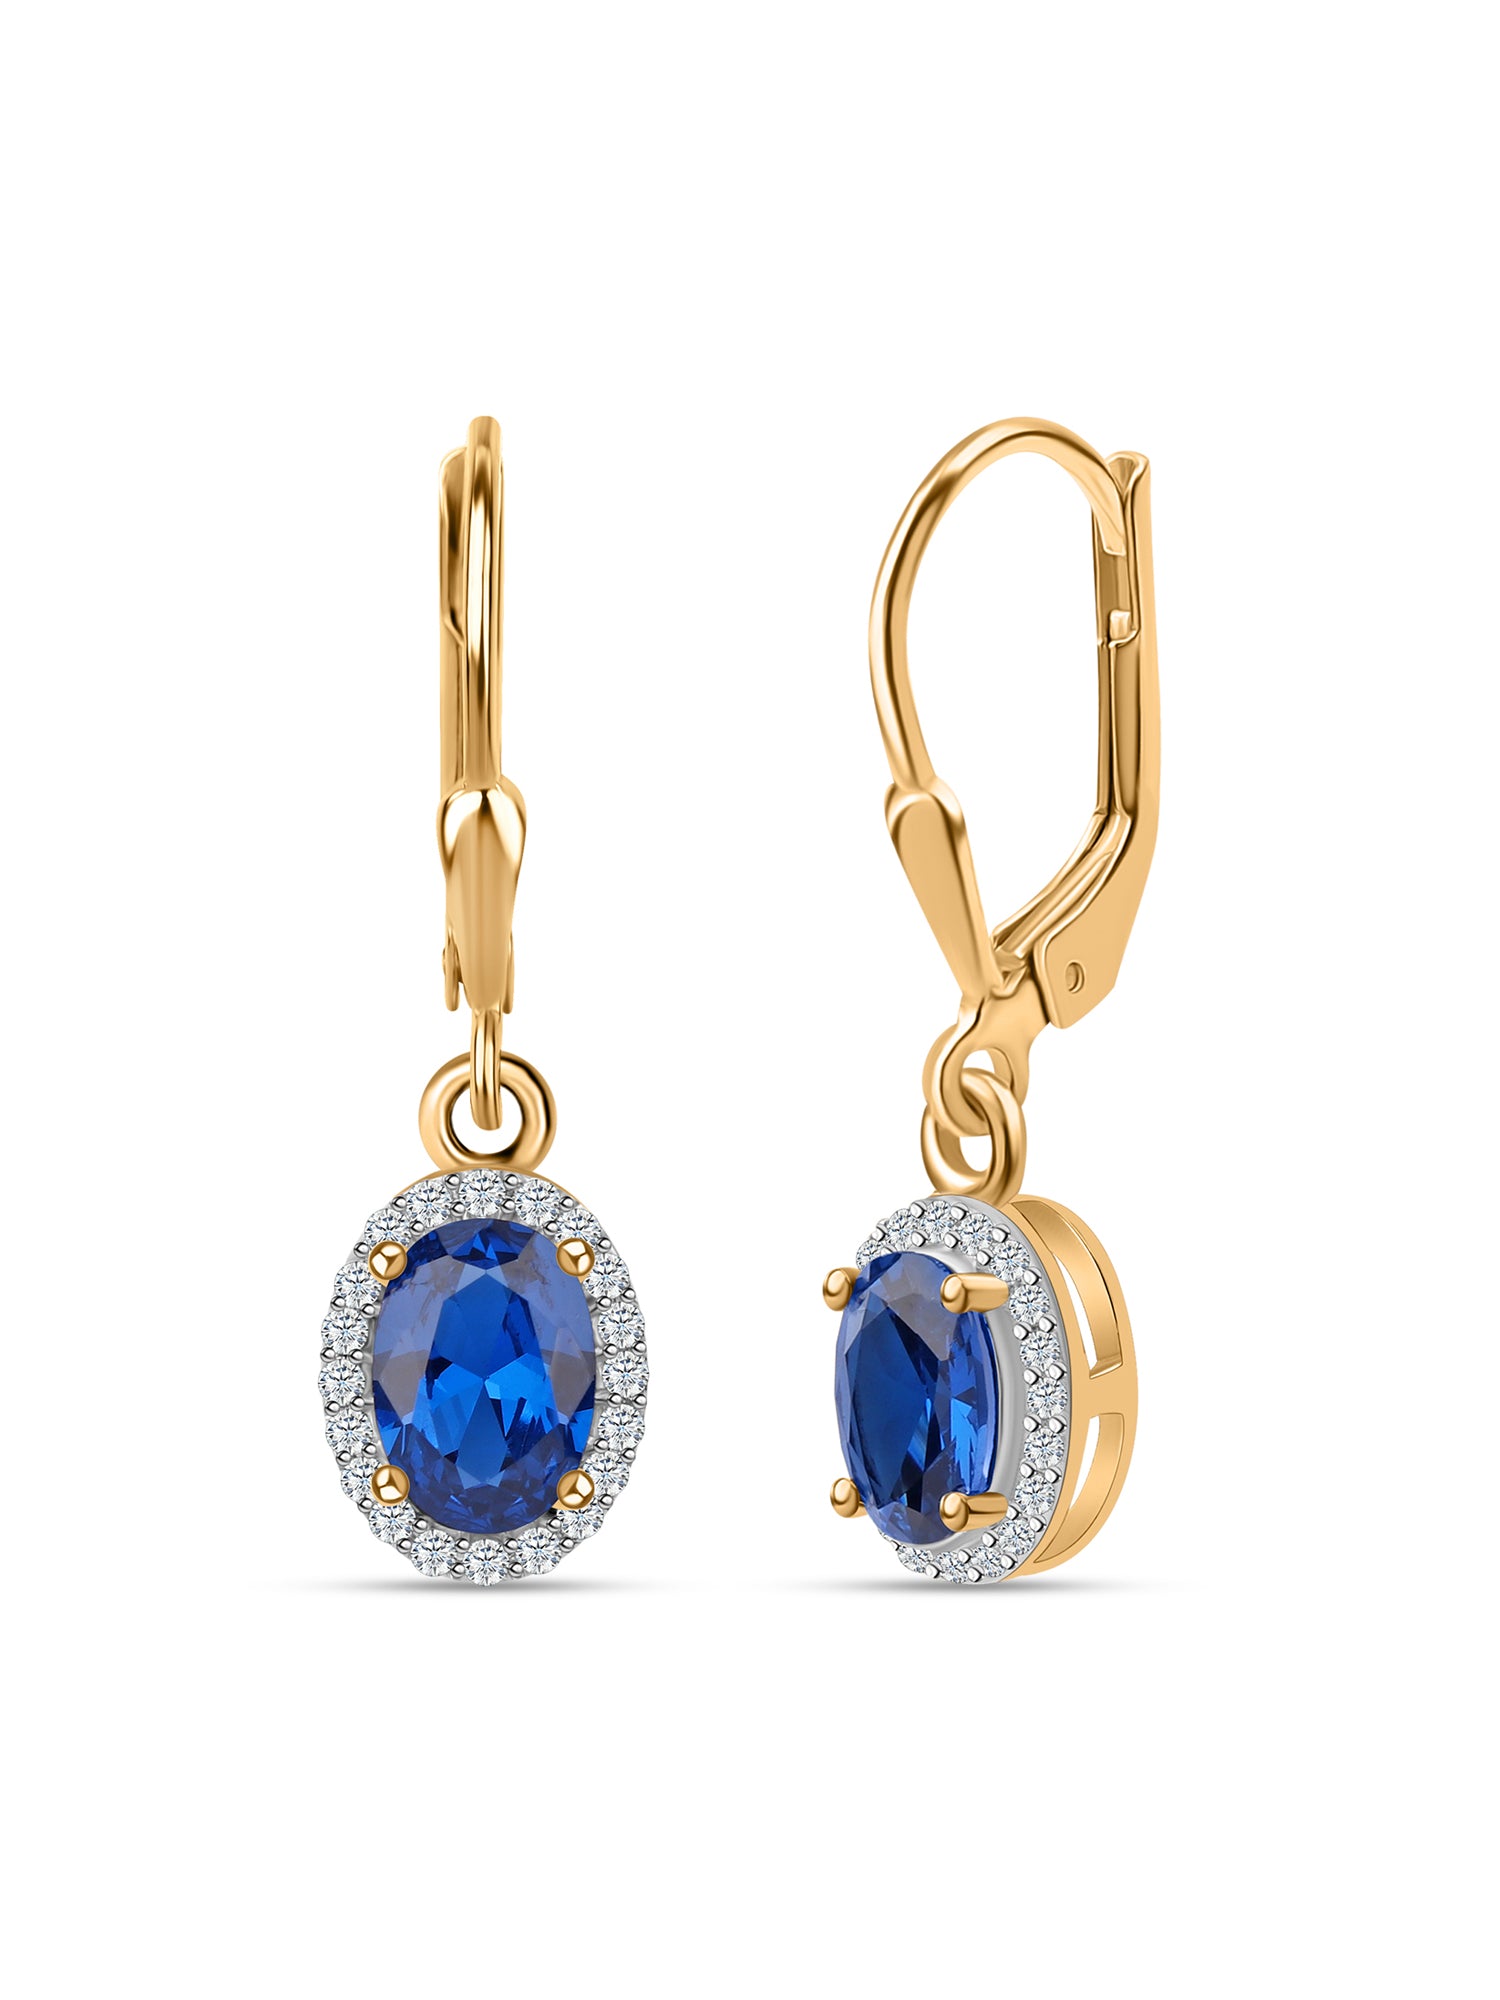 Blue Sapphire Dangle Earrings with Lever Back